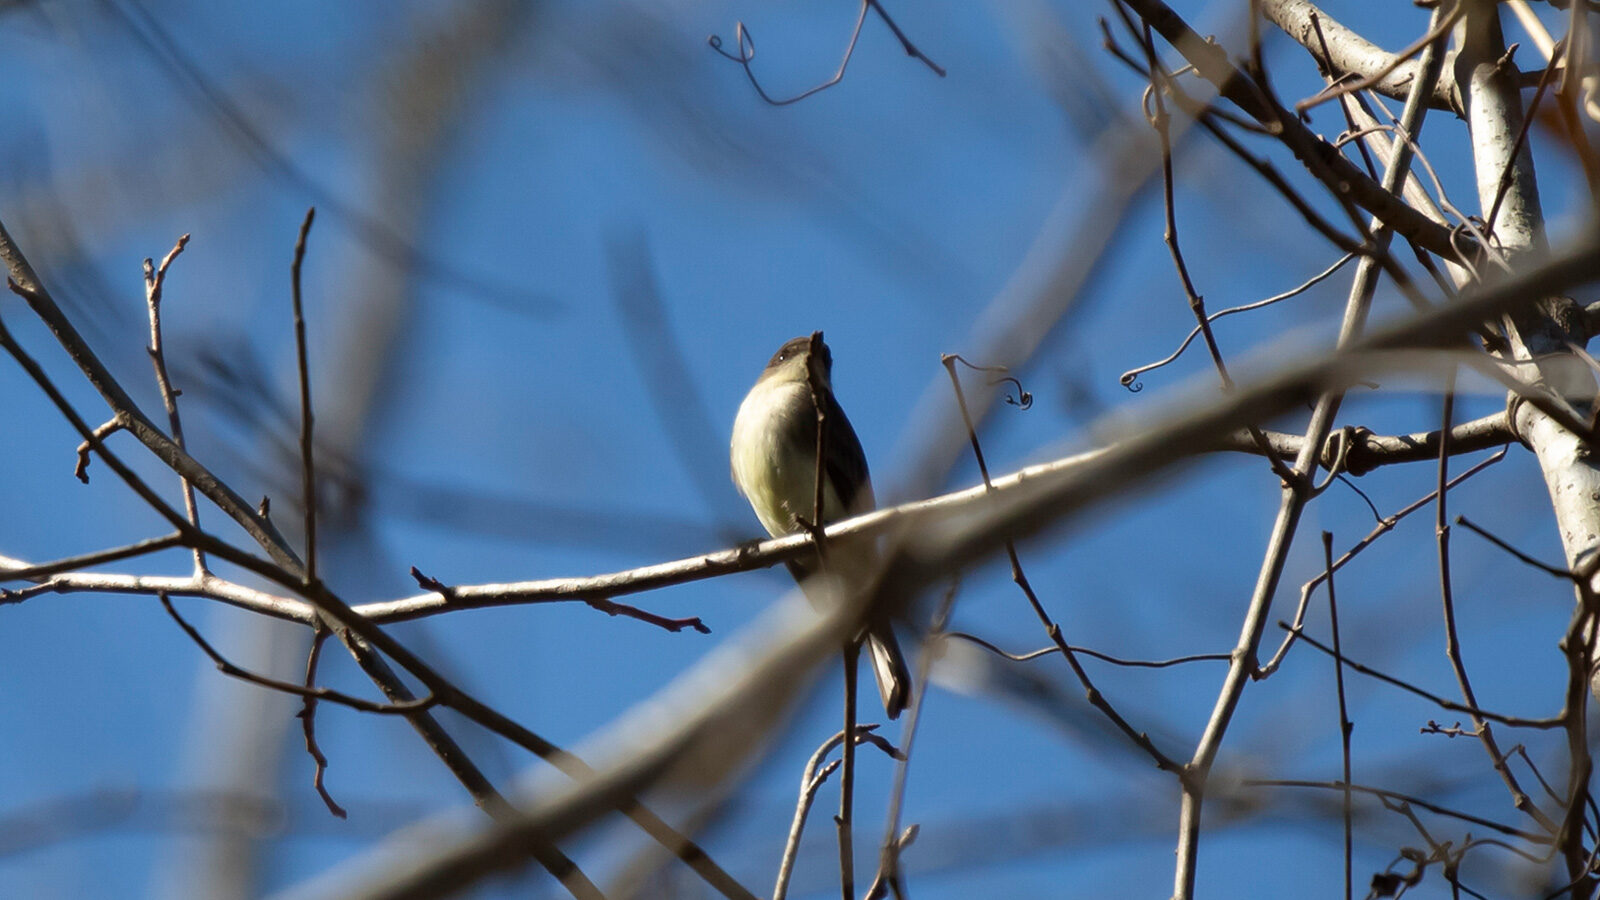 Eastern phoebe looking to the right